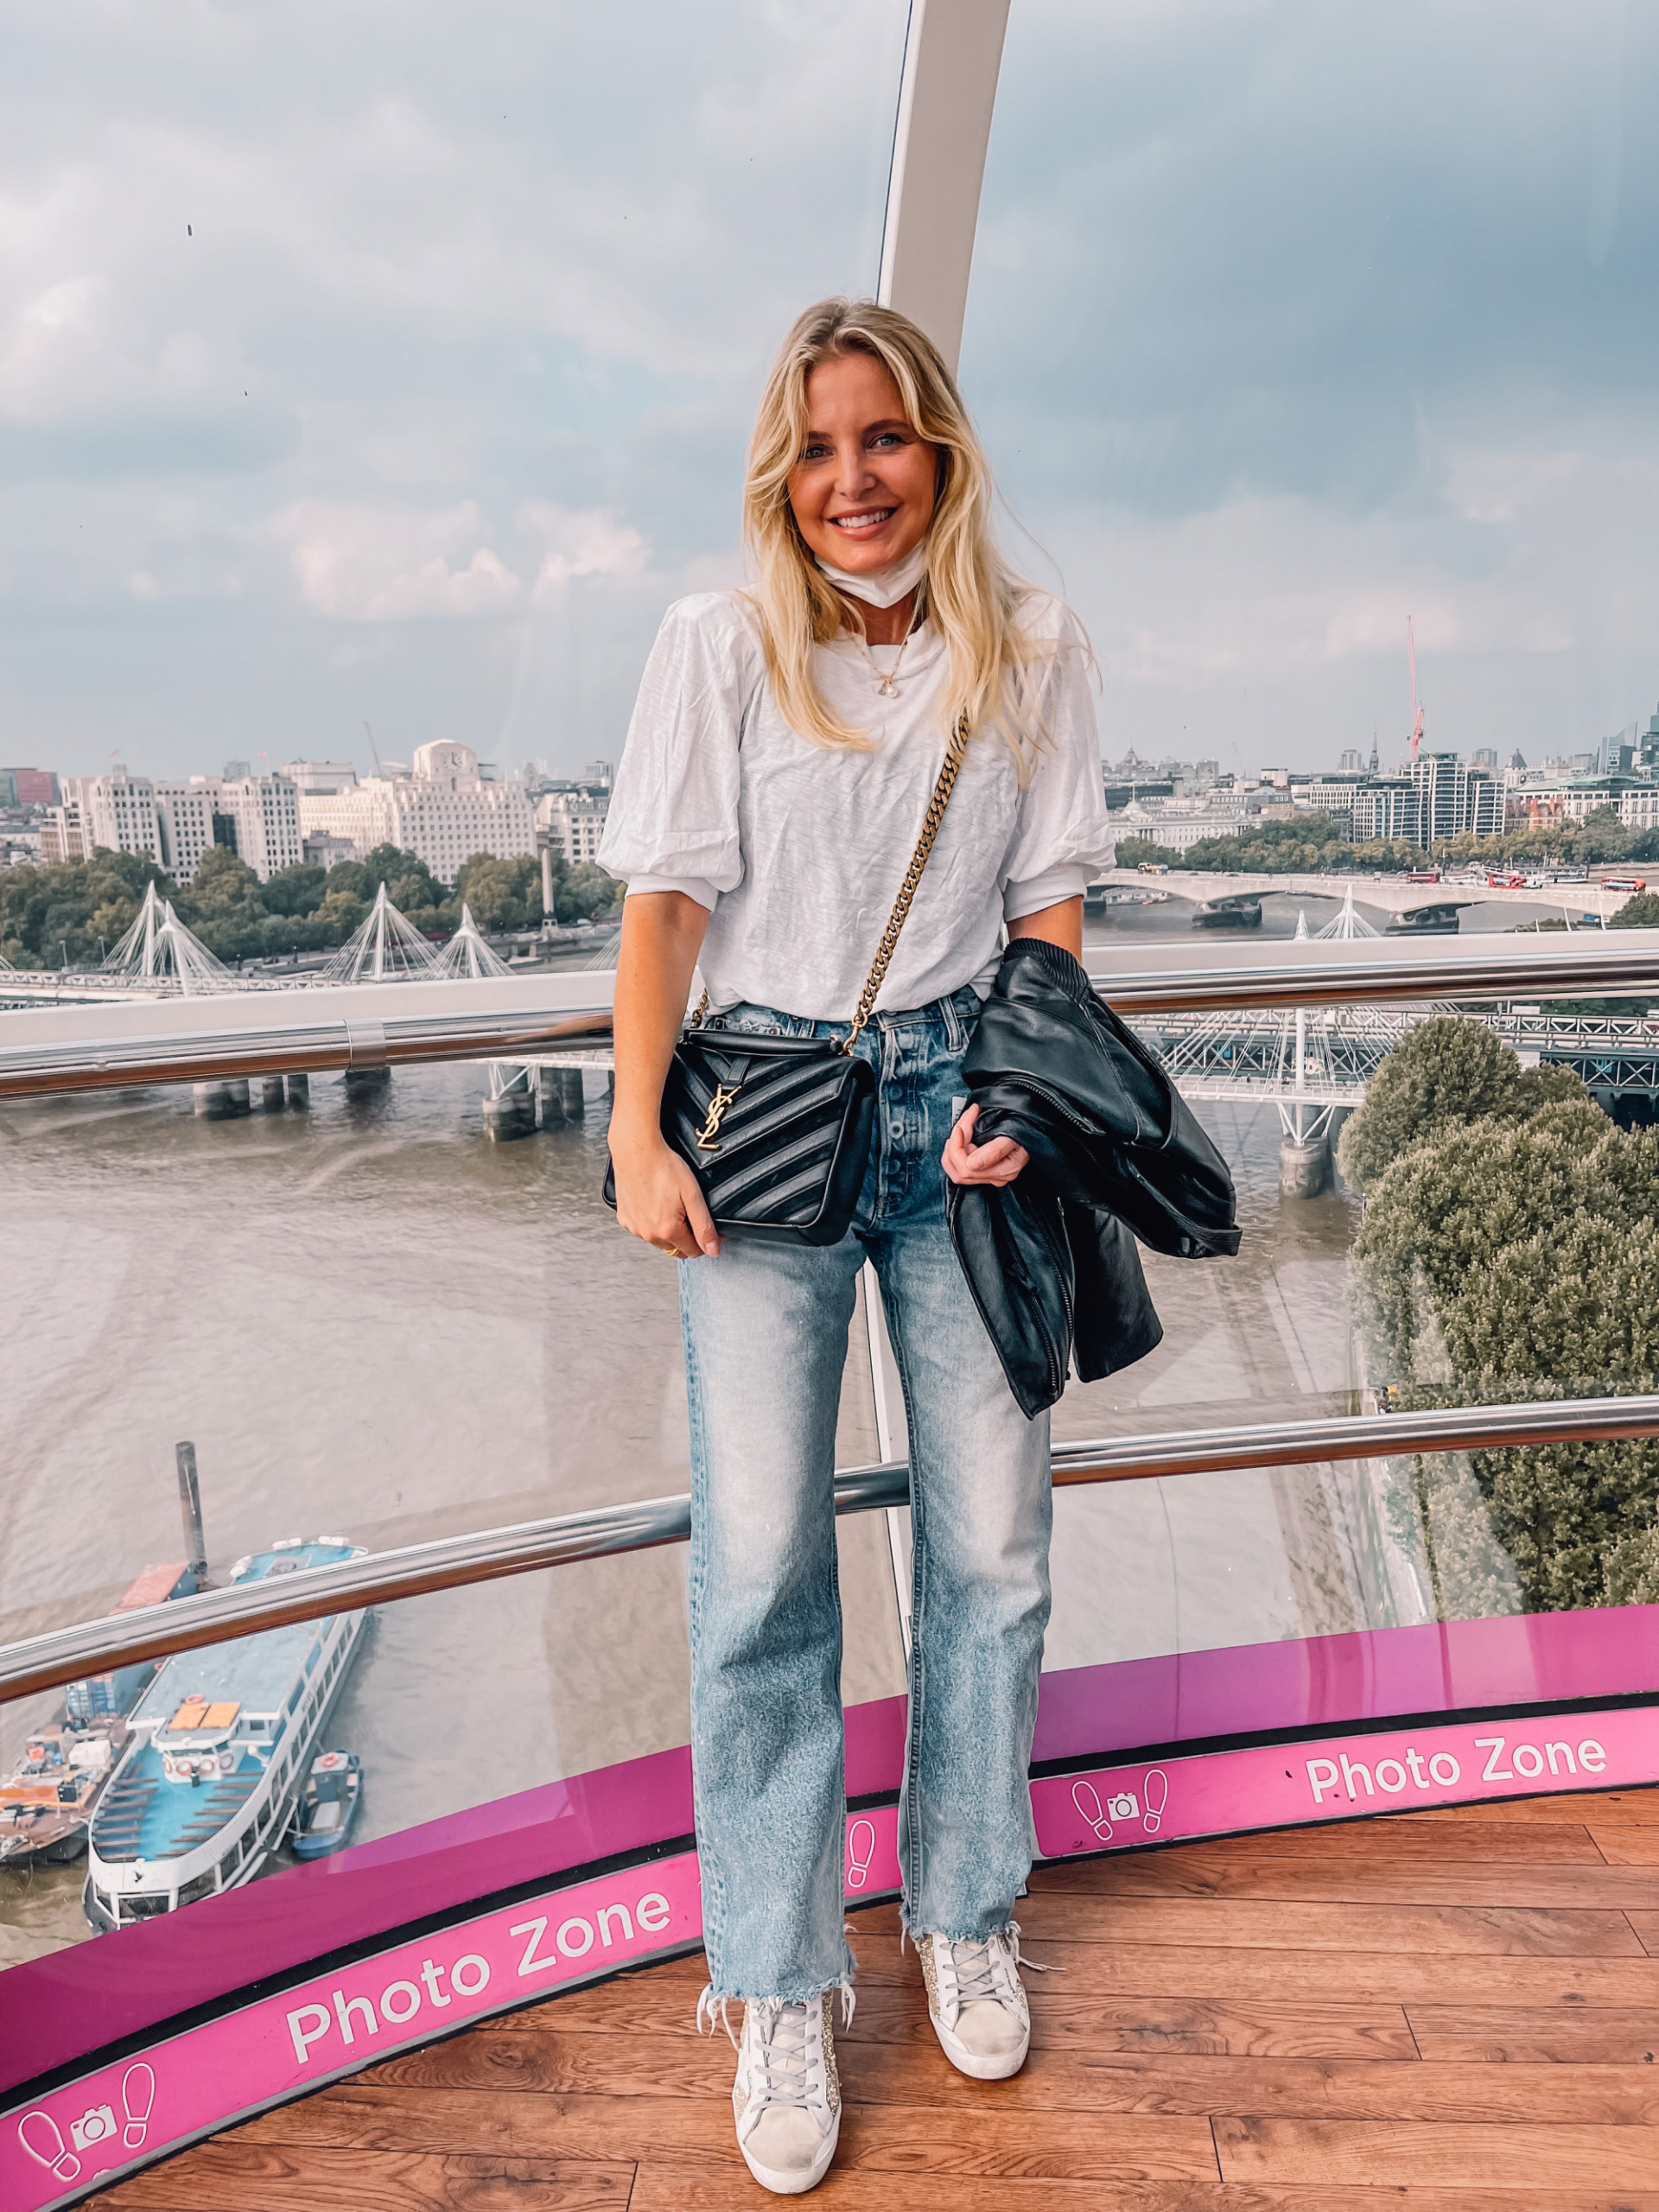 where to travel from spain, travel from spain, travel from madrid, erin bsubee, where to travel, weekend trips from spain, weekend trips from madrid, london, england, london eye, ysl chevron bag, nation ltd white tee, moussy lomita jeans, black leather moto jacket